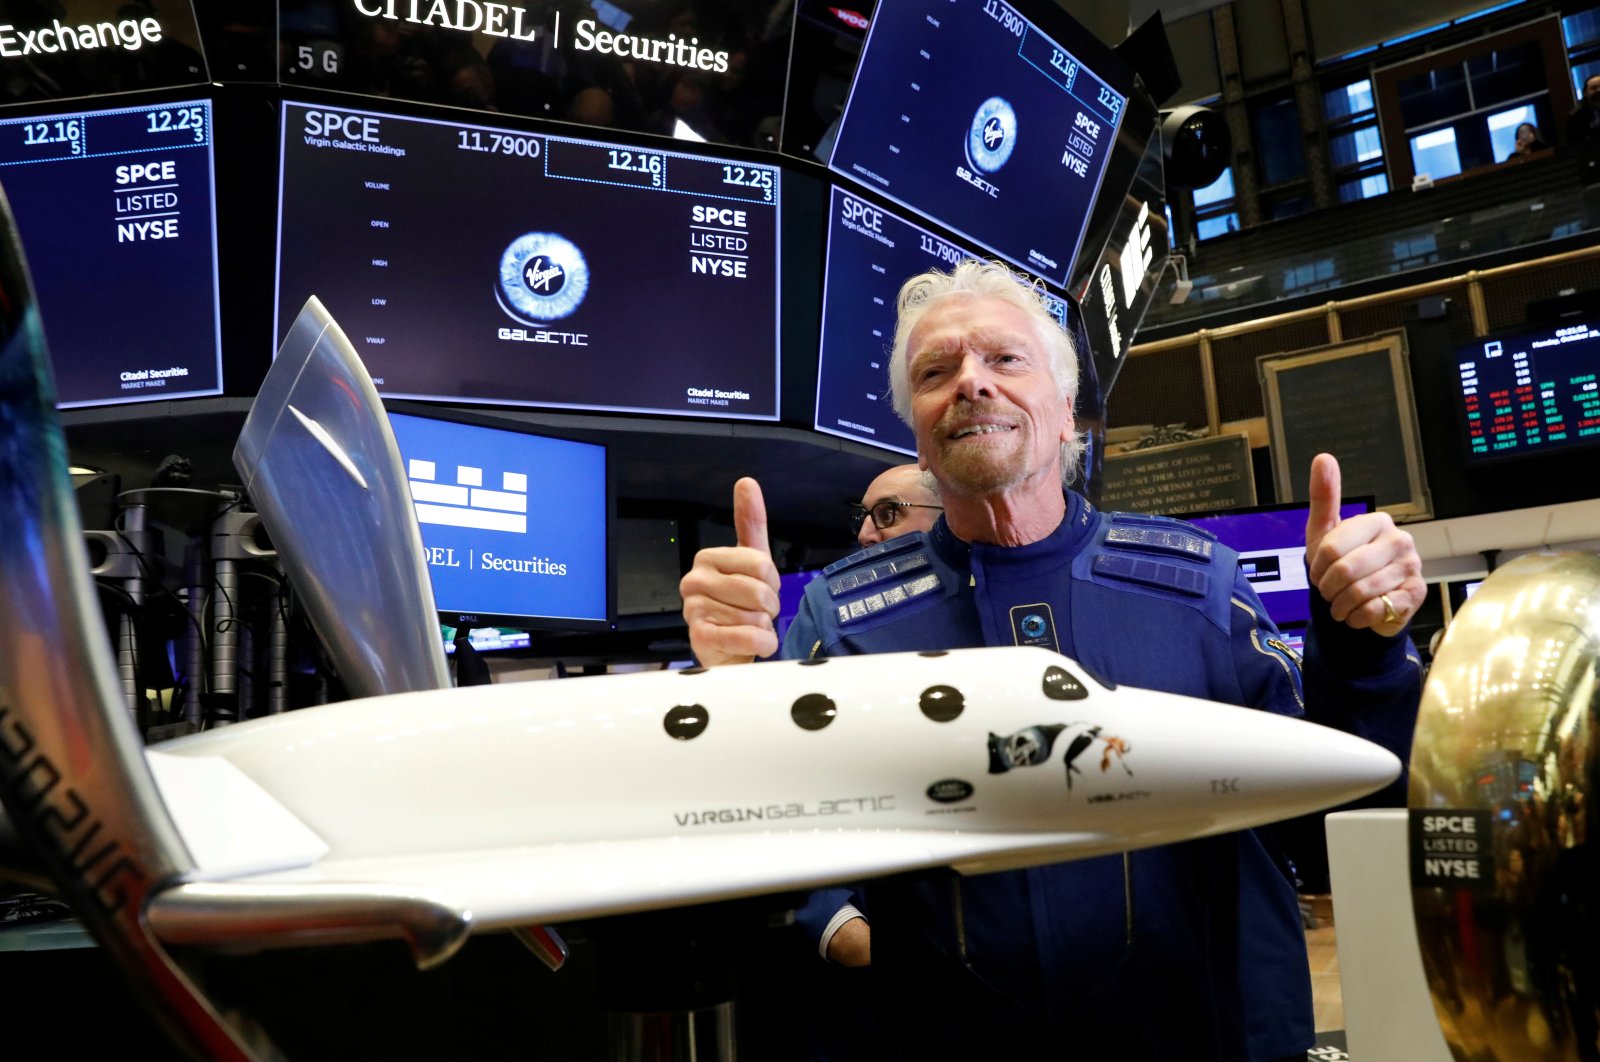 Sir Richard Branson poses on the floor of the New York Stock Exchange (NYSE) ahead of Virgin Galactic (SPCE) trading in New York, U.S., Oct. 28, 2019. (Reuters Photo)